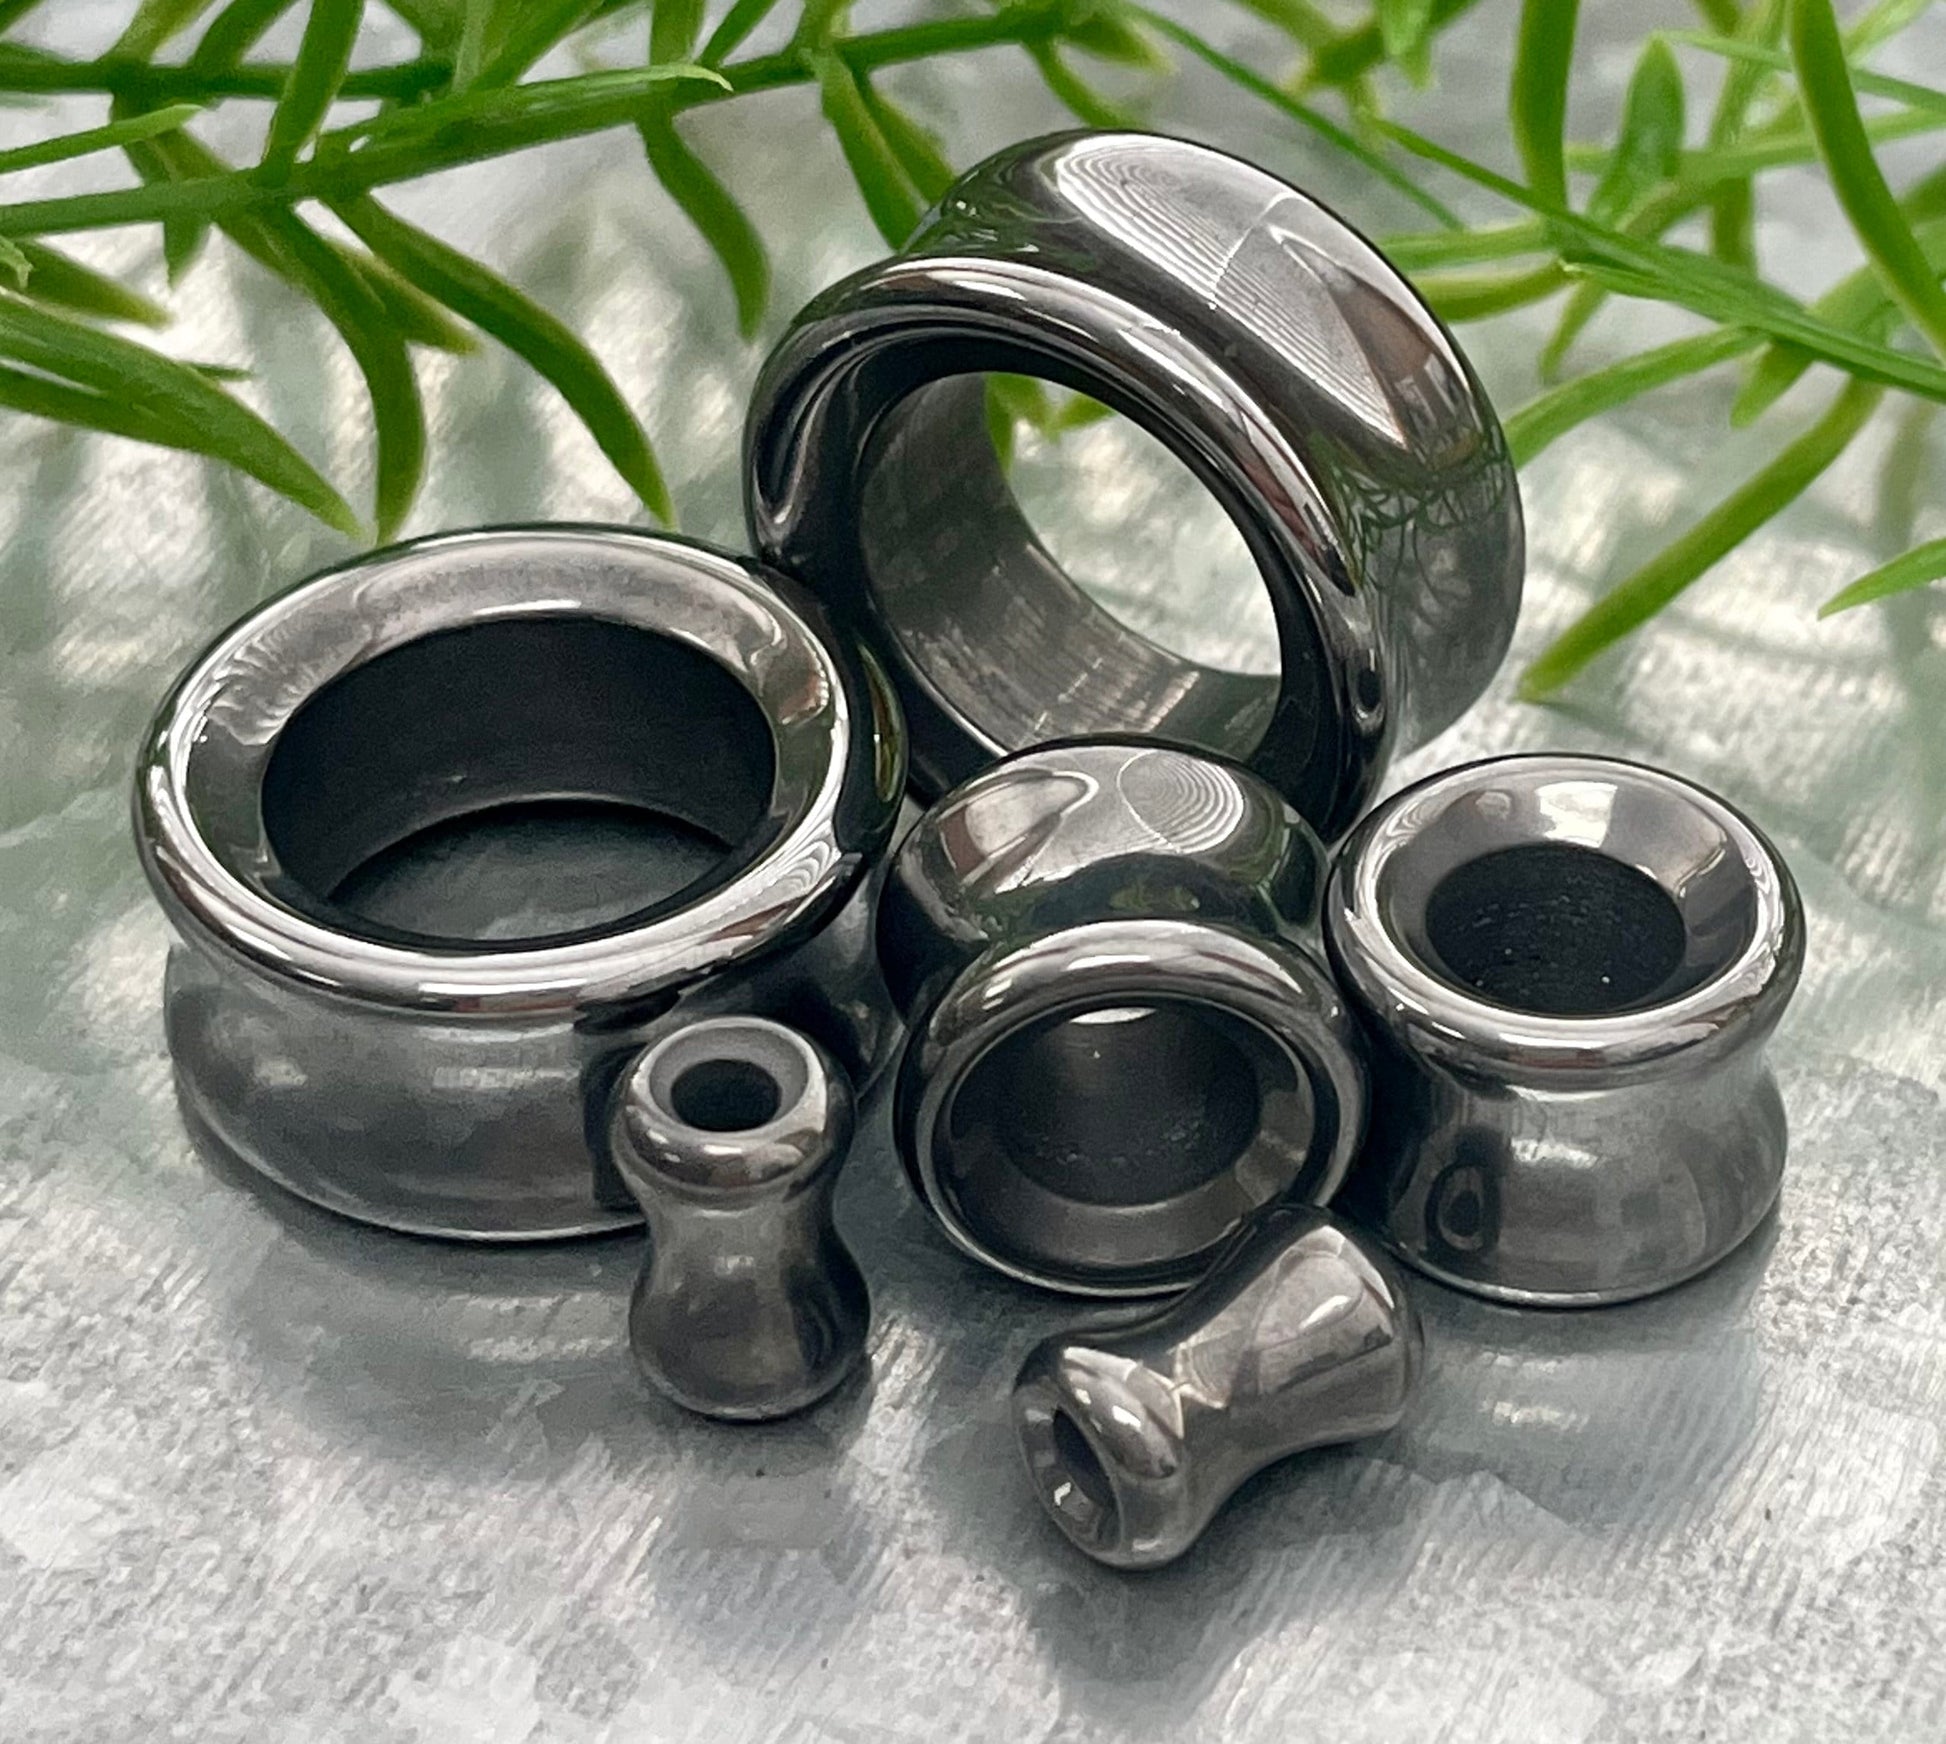 PAIR of Stunning Hematite Organic Stone Double Flare Tunnels/Plugs - Gauges 2g (6mm) thru 1" (25mm) available!